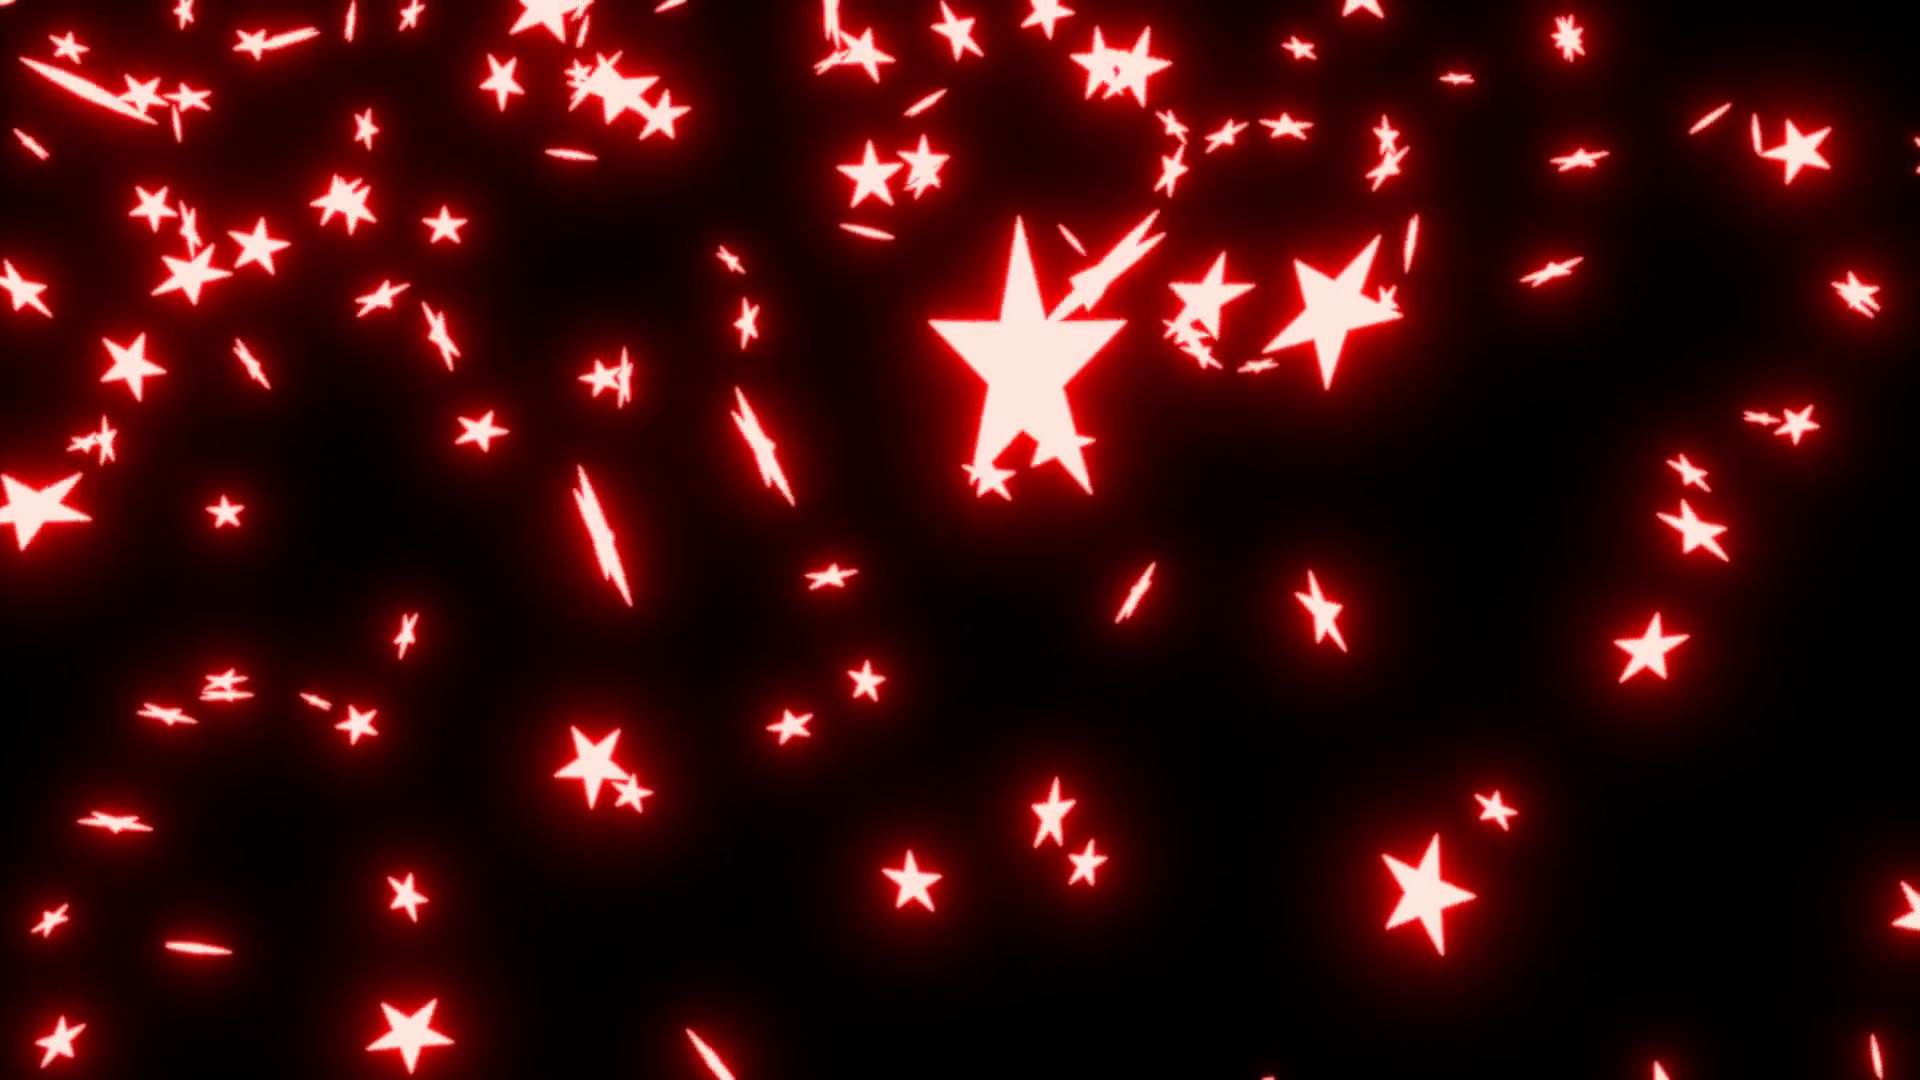 1920x1080 Animated falling neon red stars on black background 2. Motion Background -  VideoBlocks